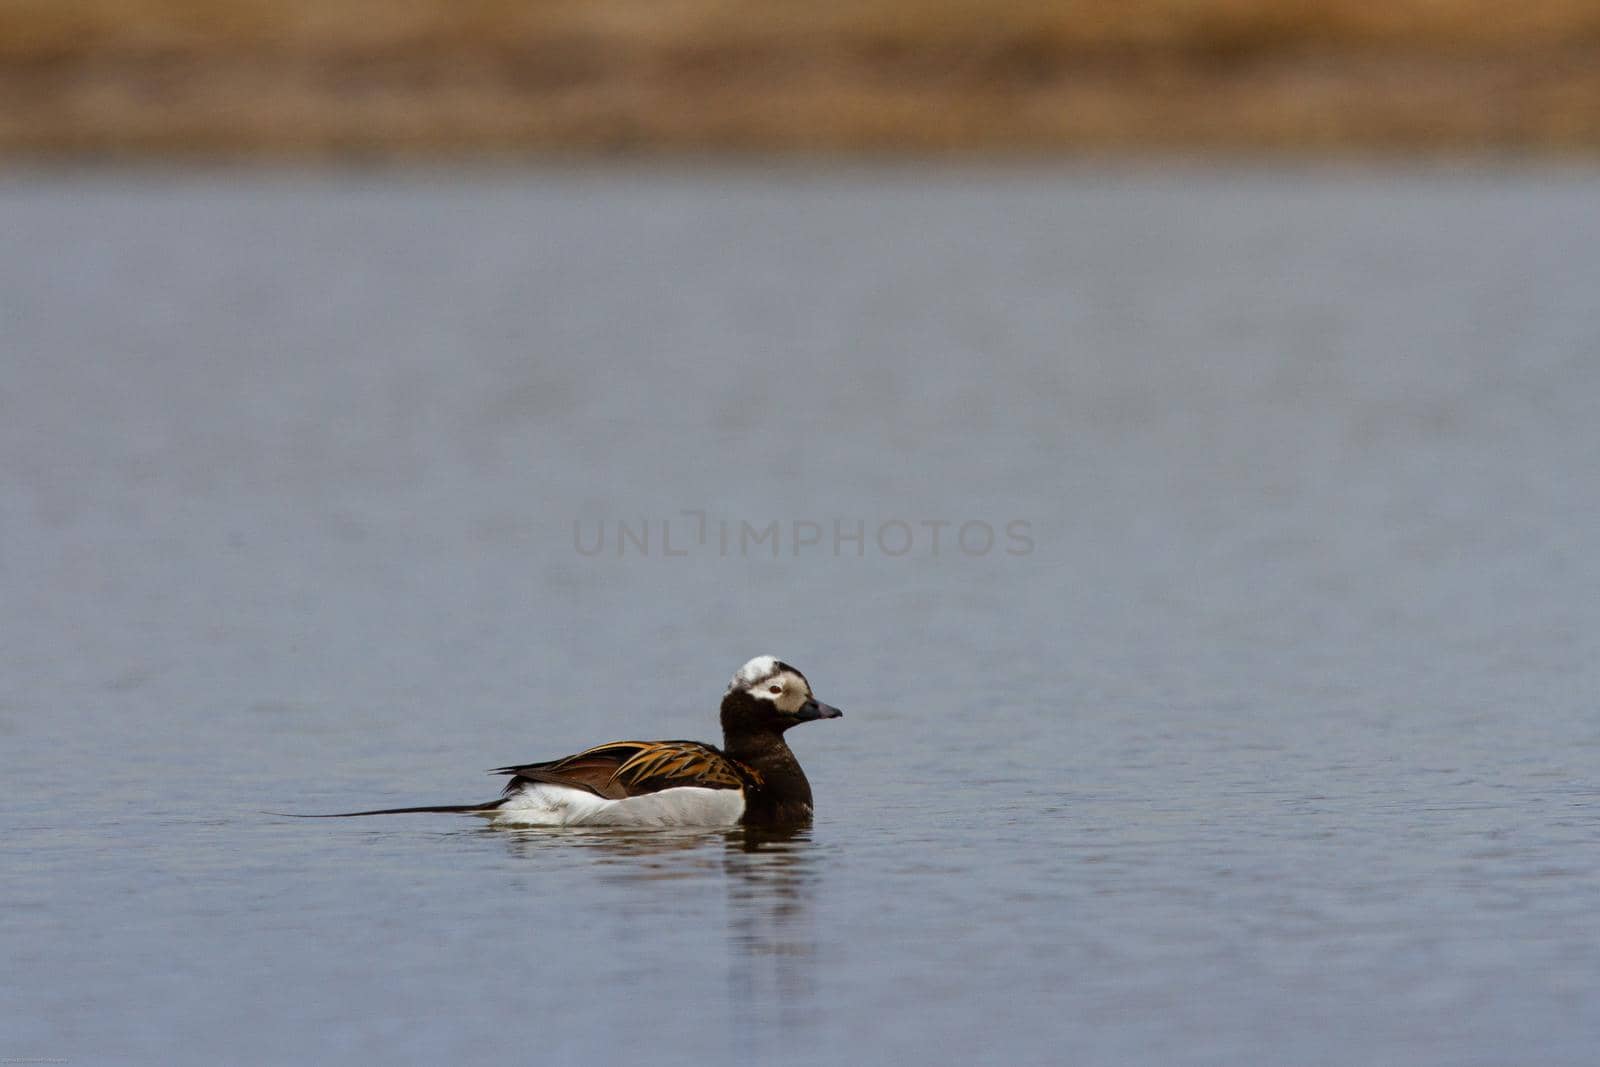 Male long-tailed duck swimming in a small pond by Granchinho